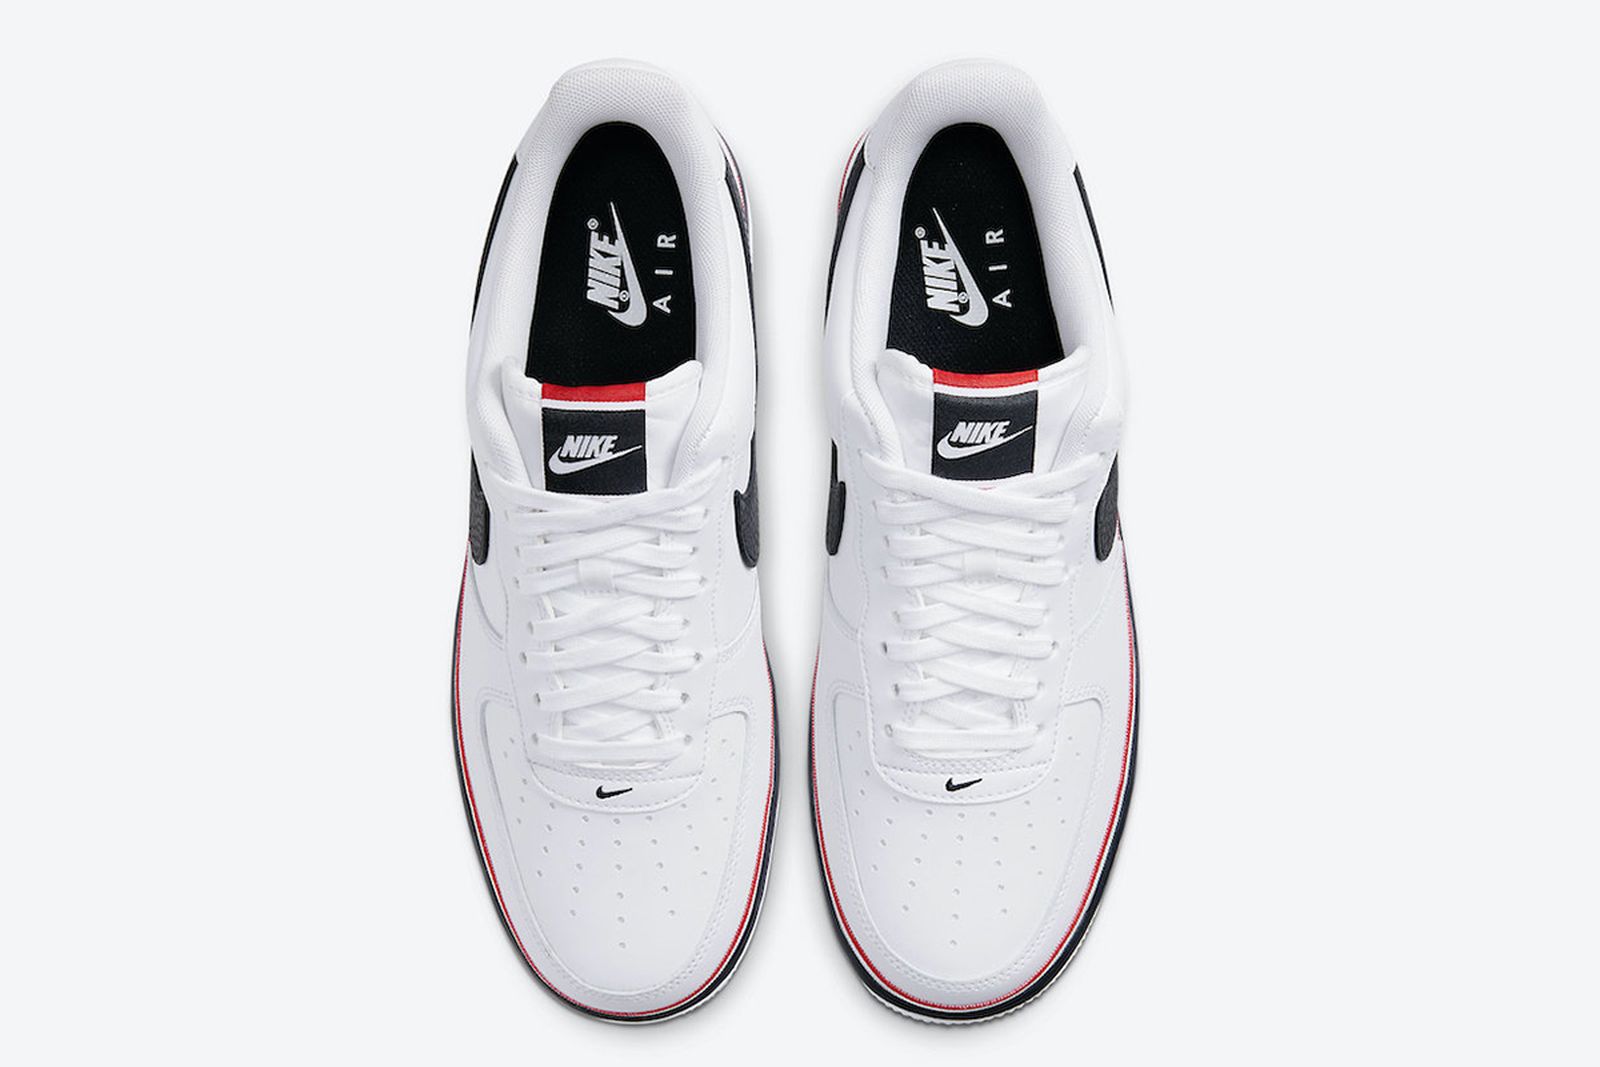 Nike air force 1 red swoosh Air Force 1 “Independence Day 2020”: Official Images & Info